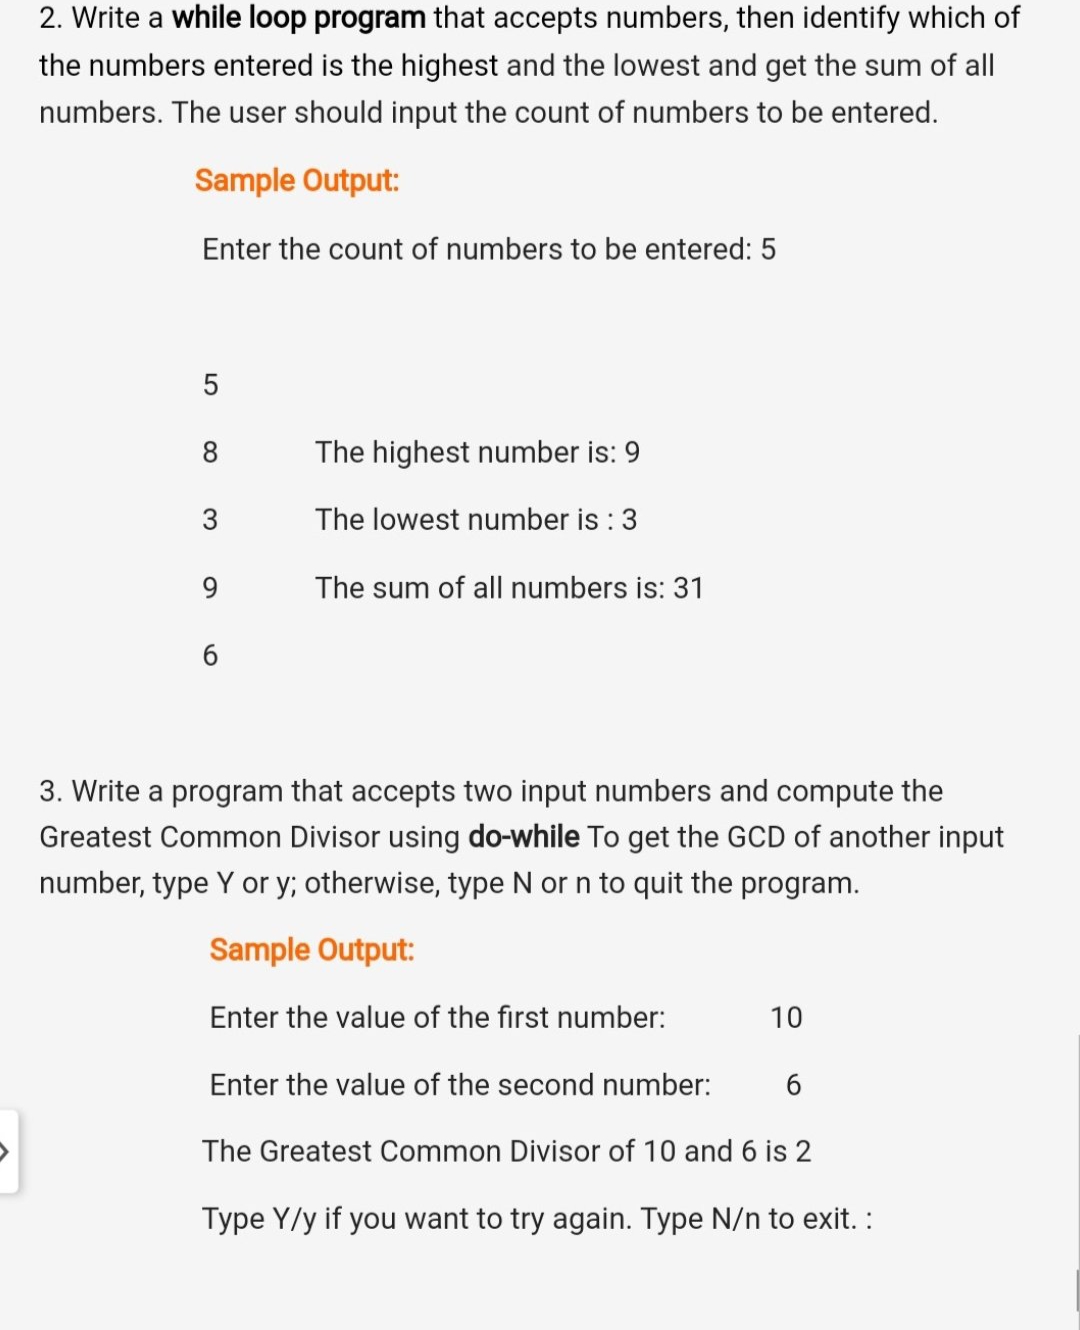 2. Write a while loop program that accepts numbers, then identify which of
the numbers entered is the highest and the lowest and get the sum of all
numbers. The user should input the count of numbers to be entered.
Sample Output:
Enter the count of numbers to be entered: 5
5
8.
The highest number is: 9
3
The lowest number is : 3
9.
The sum of all numbers is: 31
6
3. Write a program that accepts two input numbers and compute the
Greatest Common Divisor using do-while To get the GCD of another input
number, type Y or y; otherwise, type N or n to quit the program.
Sample Output:
Enter the value of the first number:
10
Enter the value of the second number:
The Greatest Common Divisor of 10 and 6 is 2
Type Y/y if you want to try again. Type N/n to exit. :
